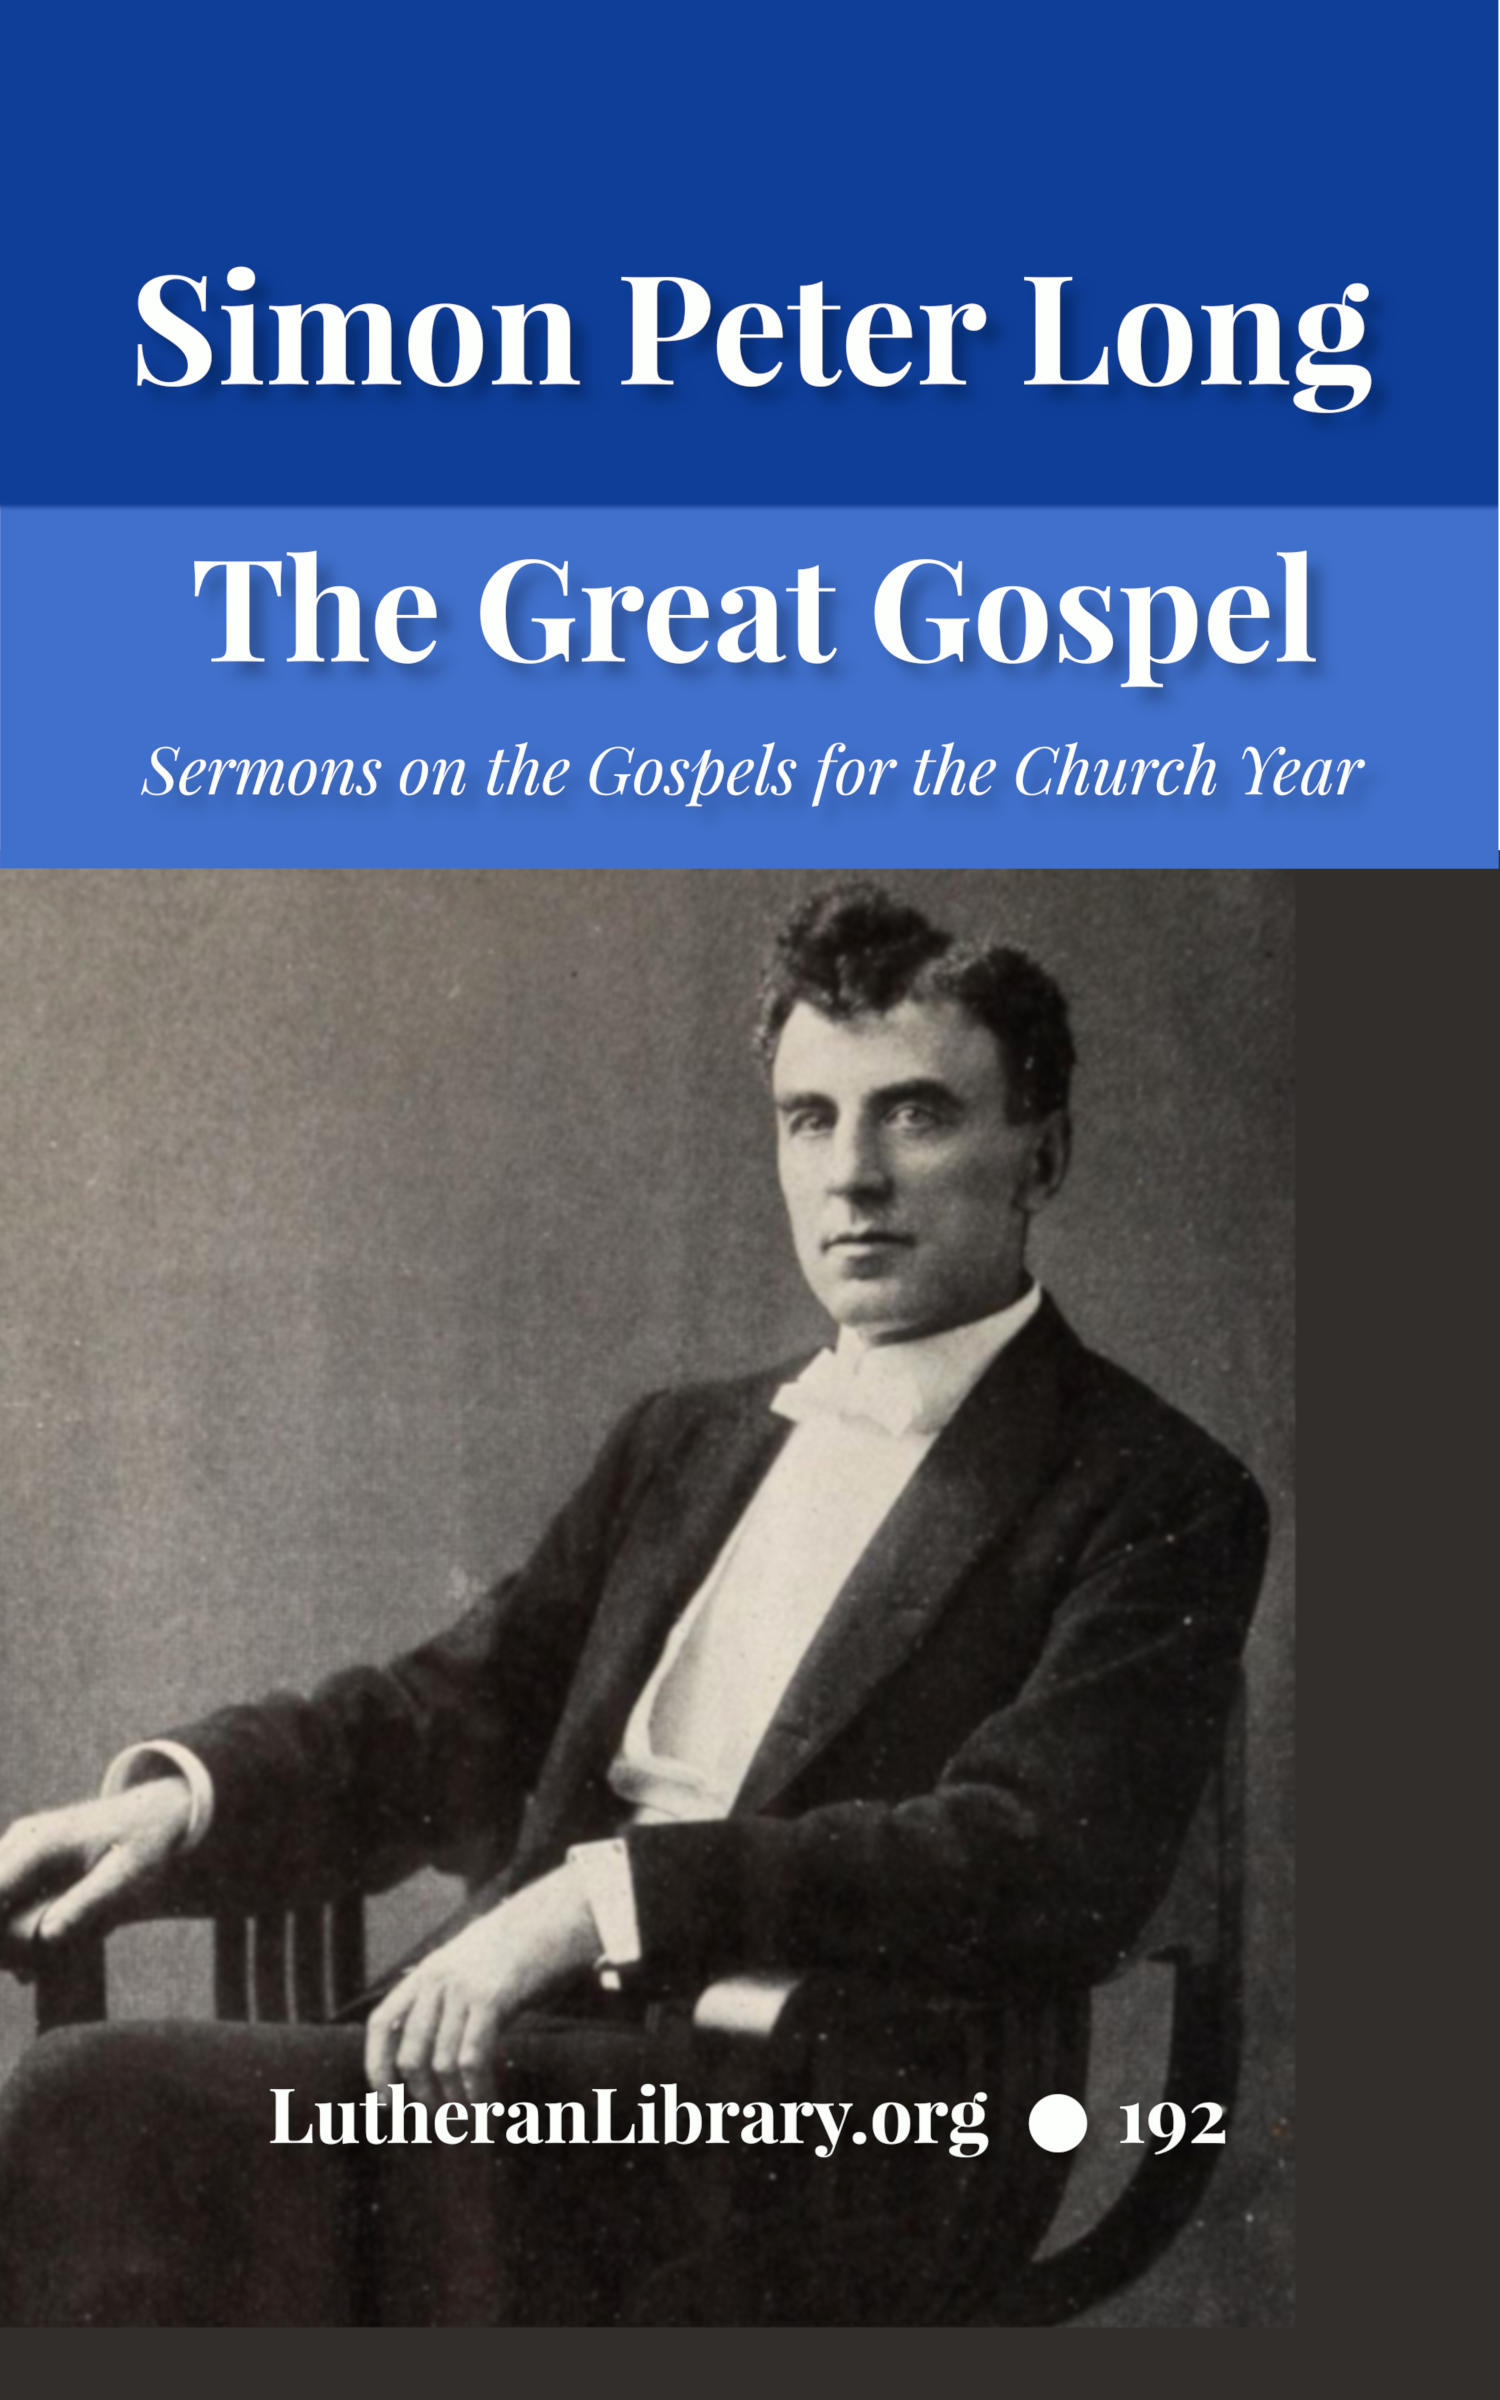 The Great Gospel by Simon Peter Long | Lutheran Library Publishing Ministry